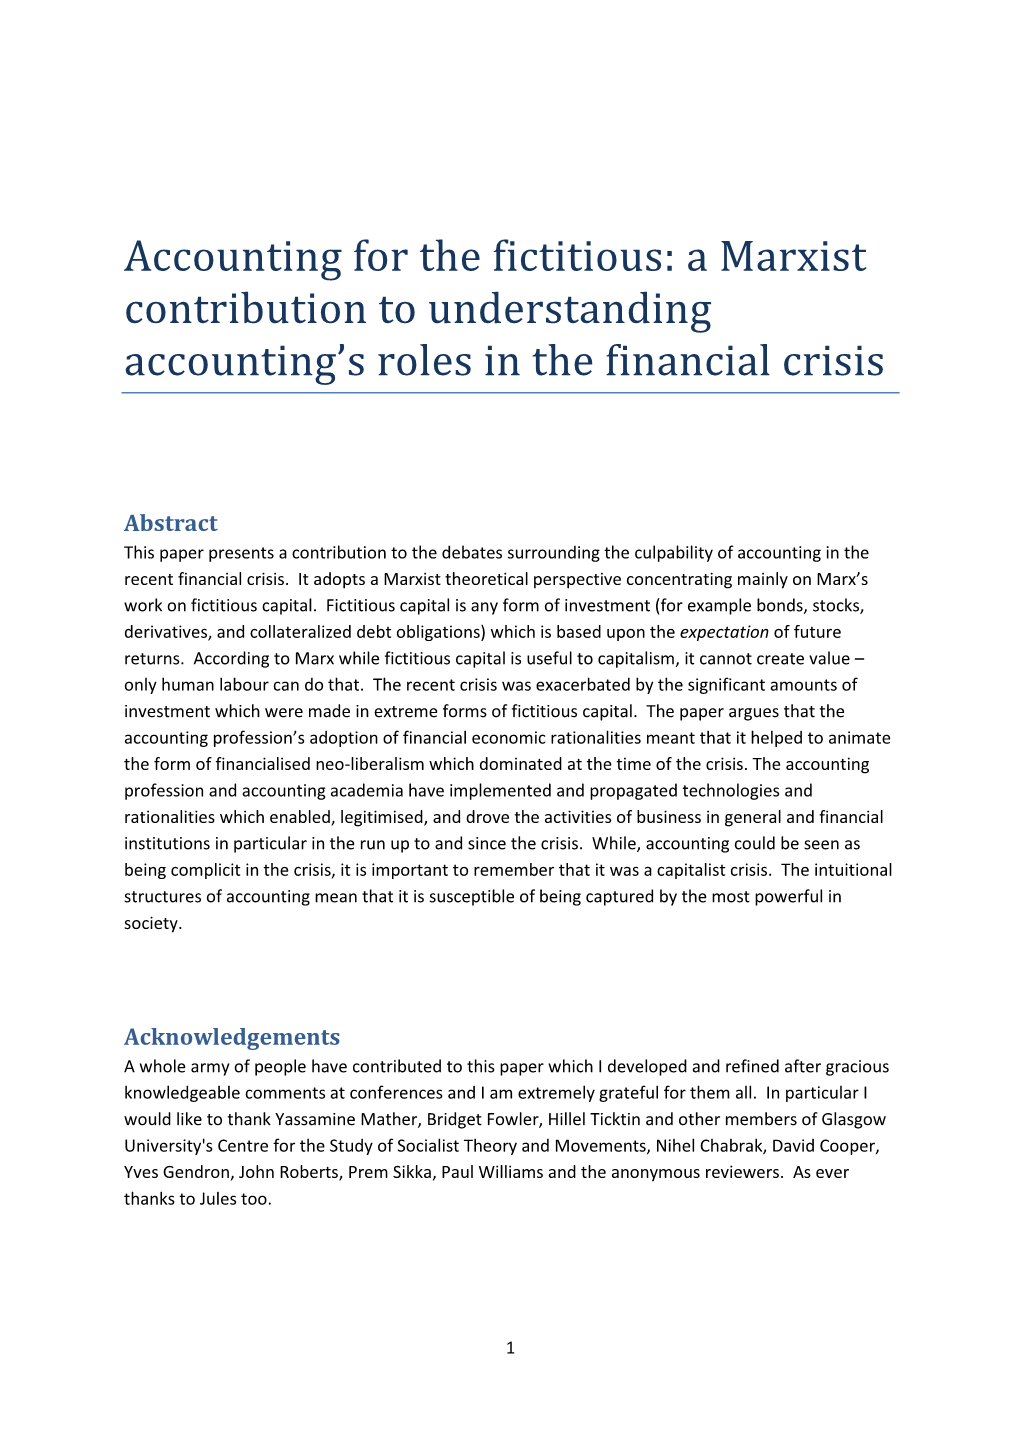 Accounting for the Fictitious: a Marxist Contribution to Understanding Accounting’S Roles in the Financial Crisis